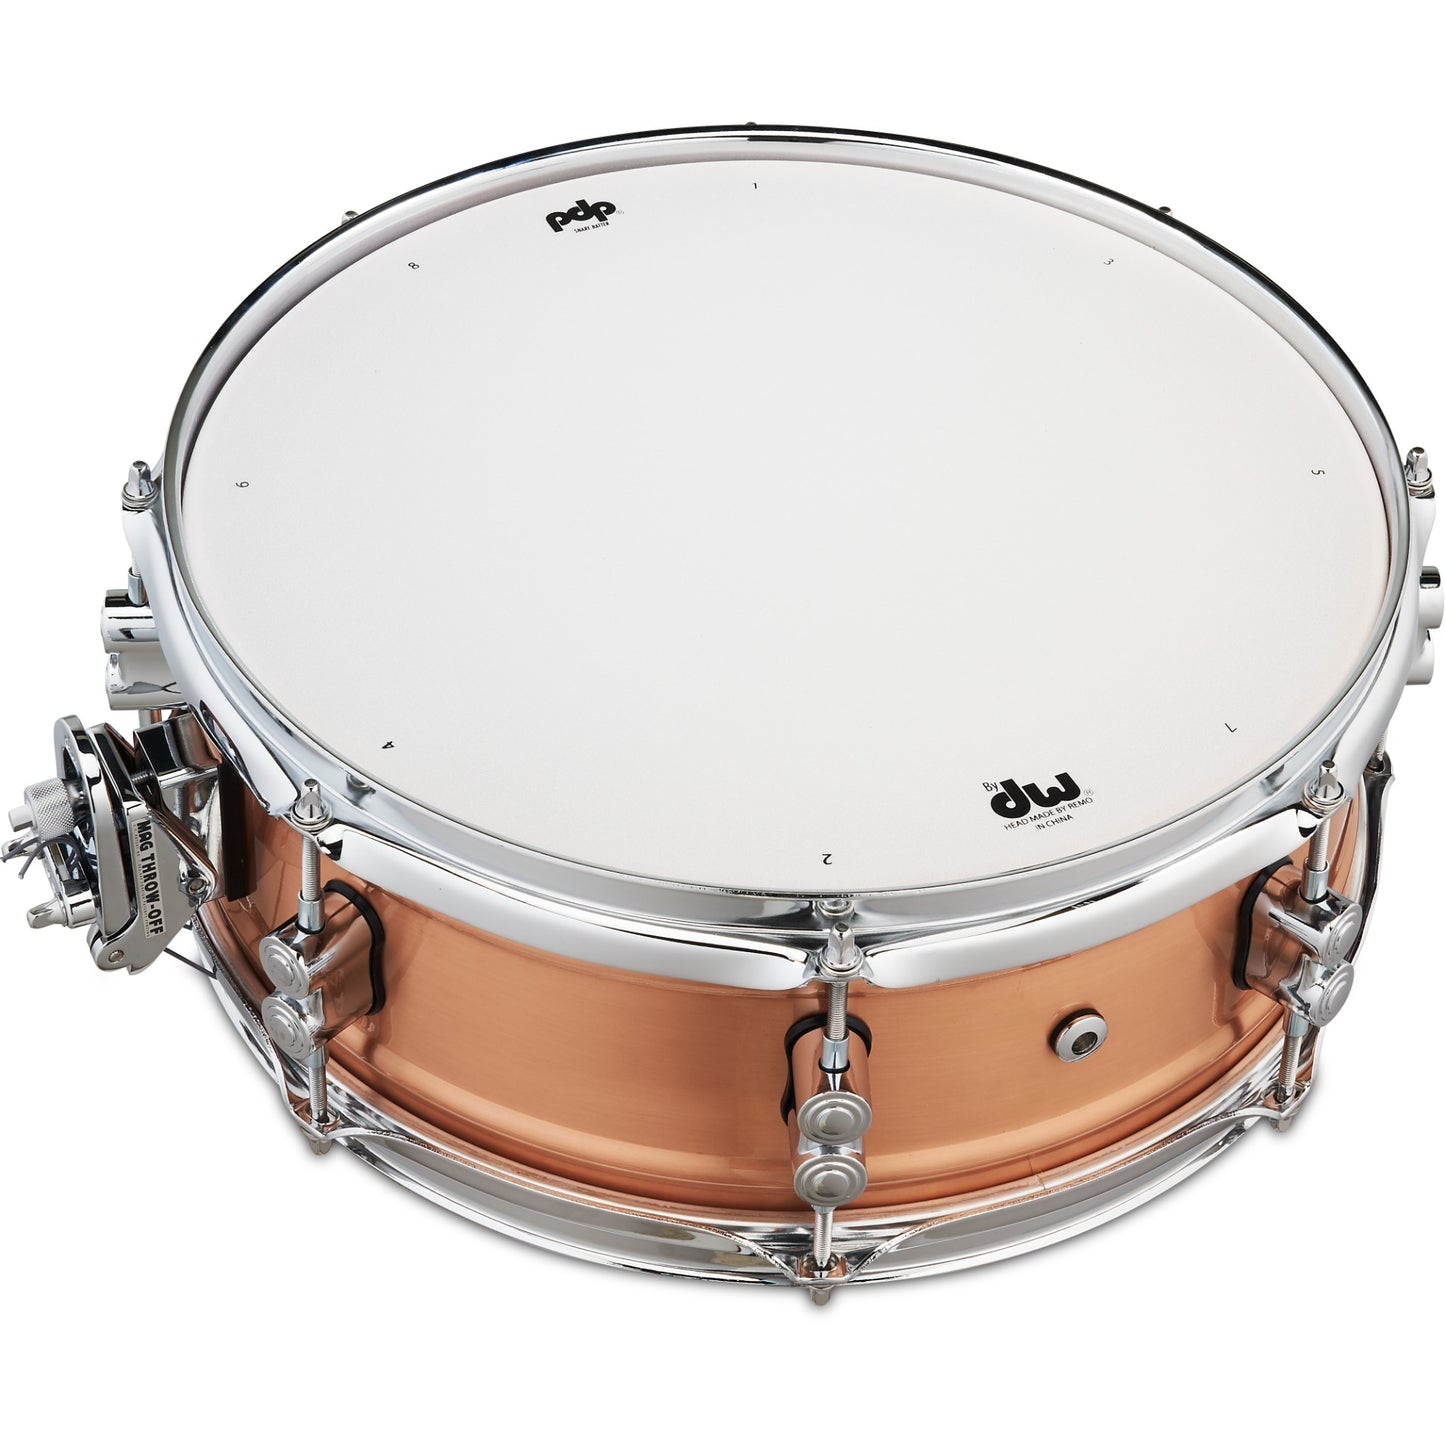 Pacific Drums & Percussion Concept Series 5x14 Snare Drum - 1mm Copper